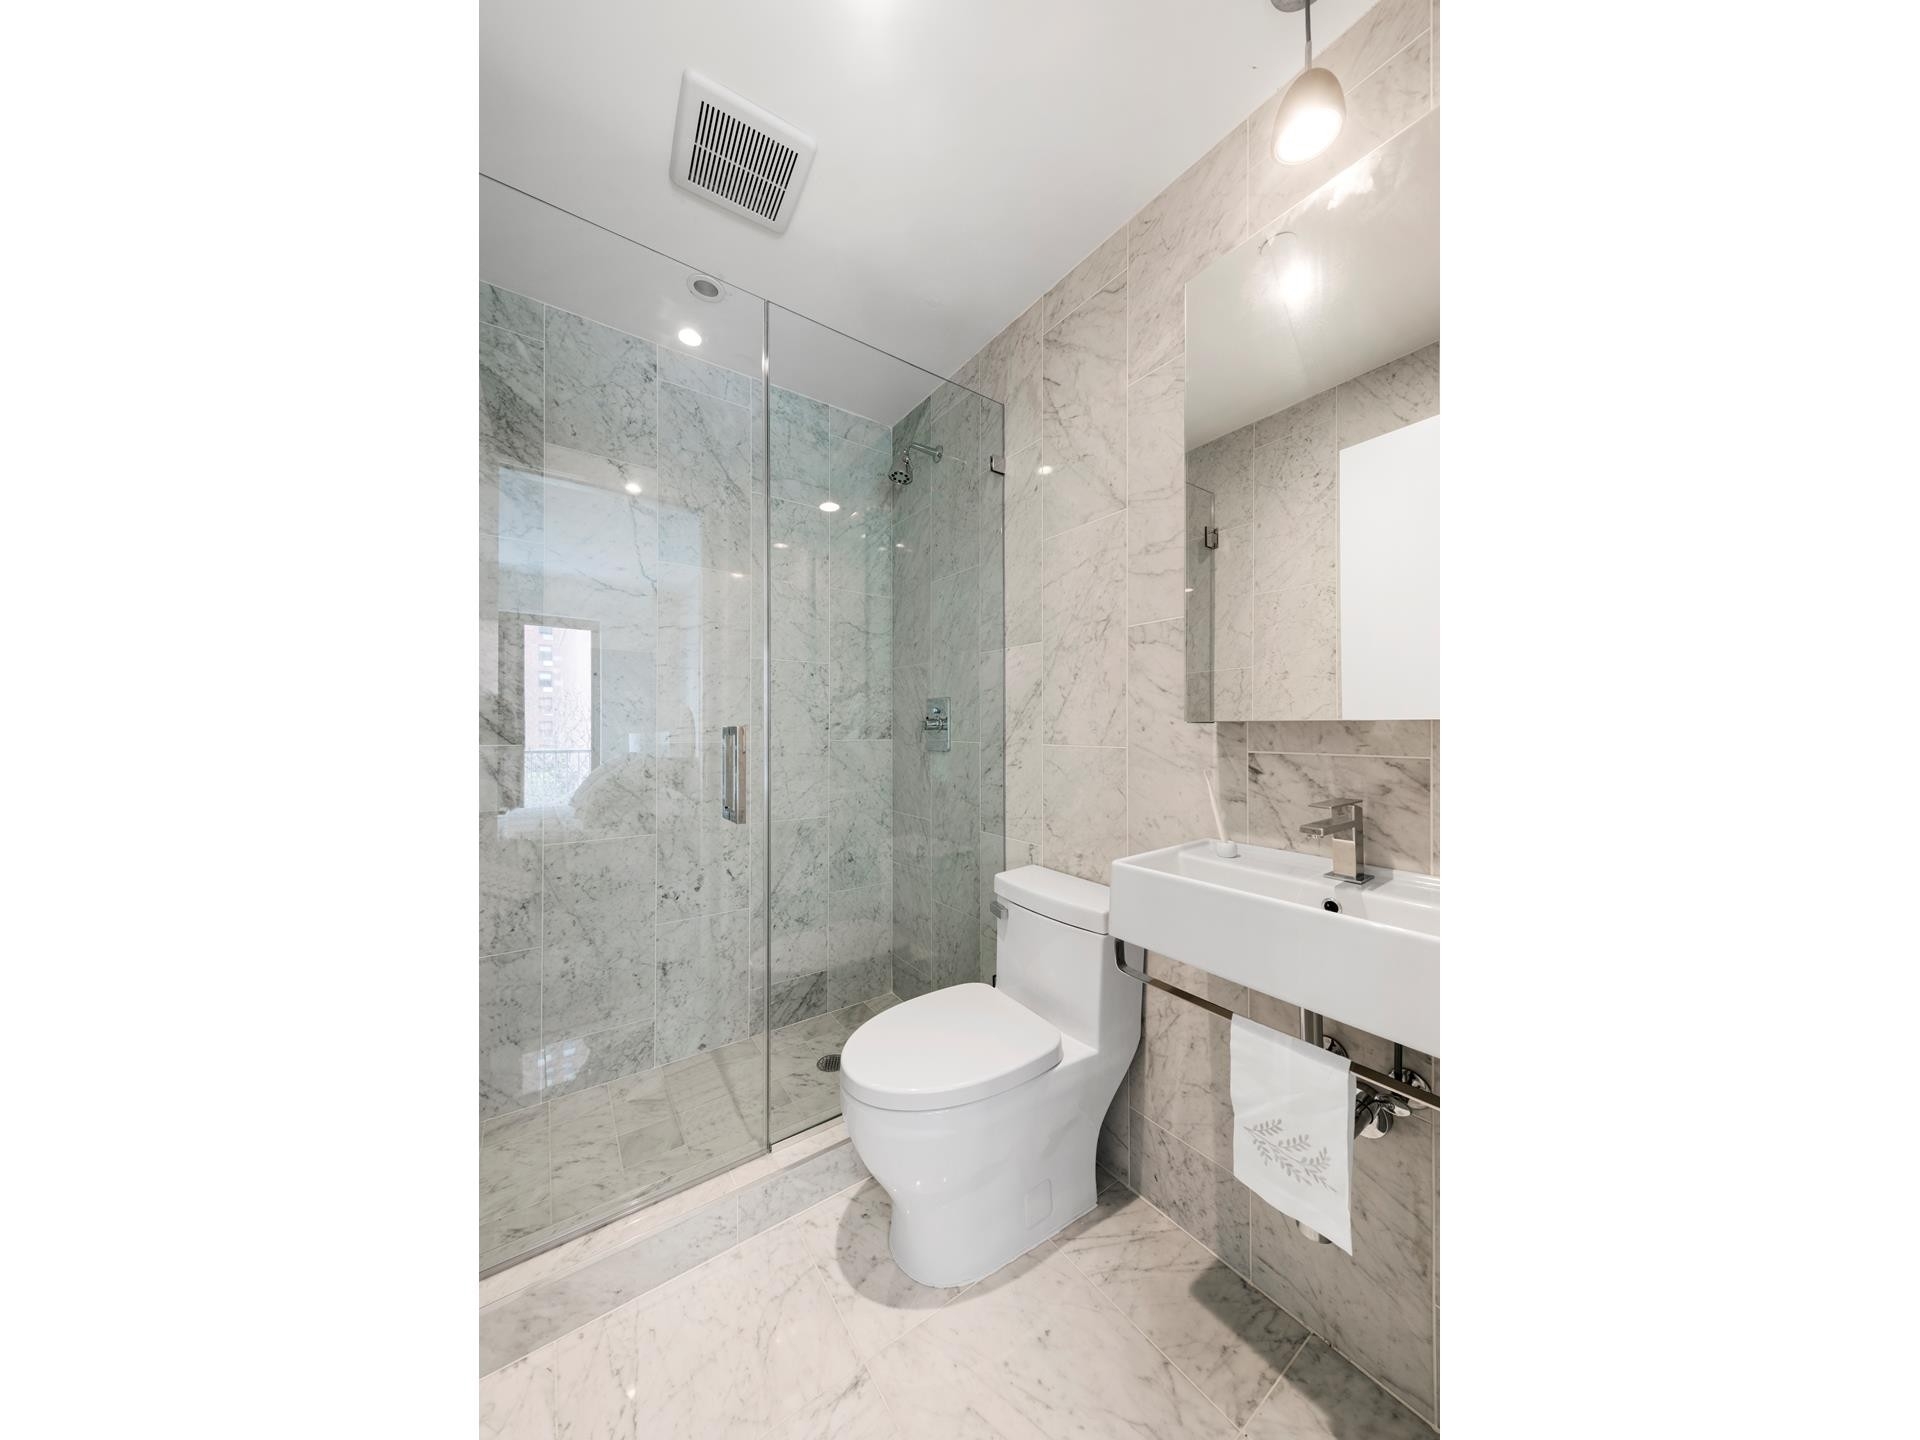 6. Condominiums for Sale at Alston, 308 W 133RD ST, 11D Central Harlem, New York, NY 10030